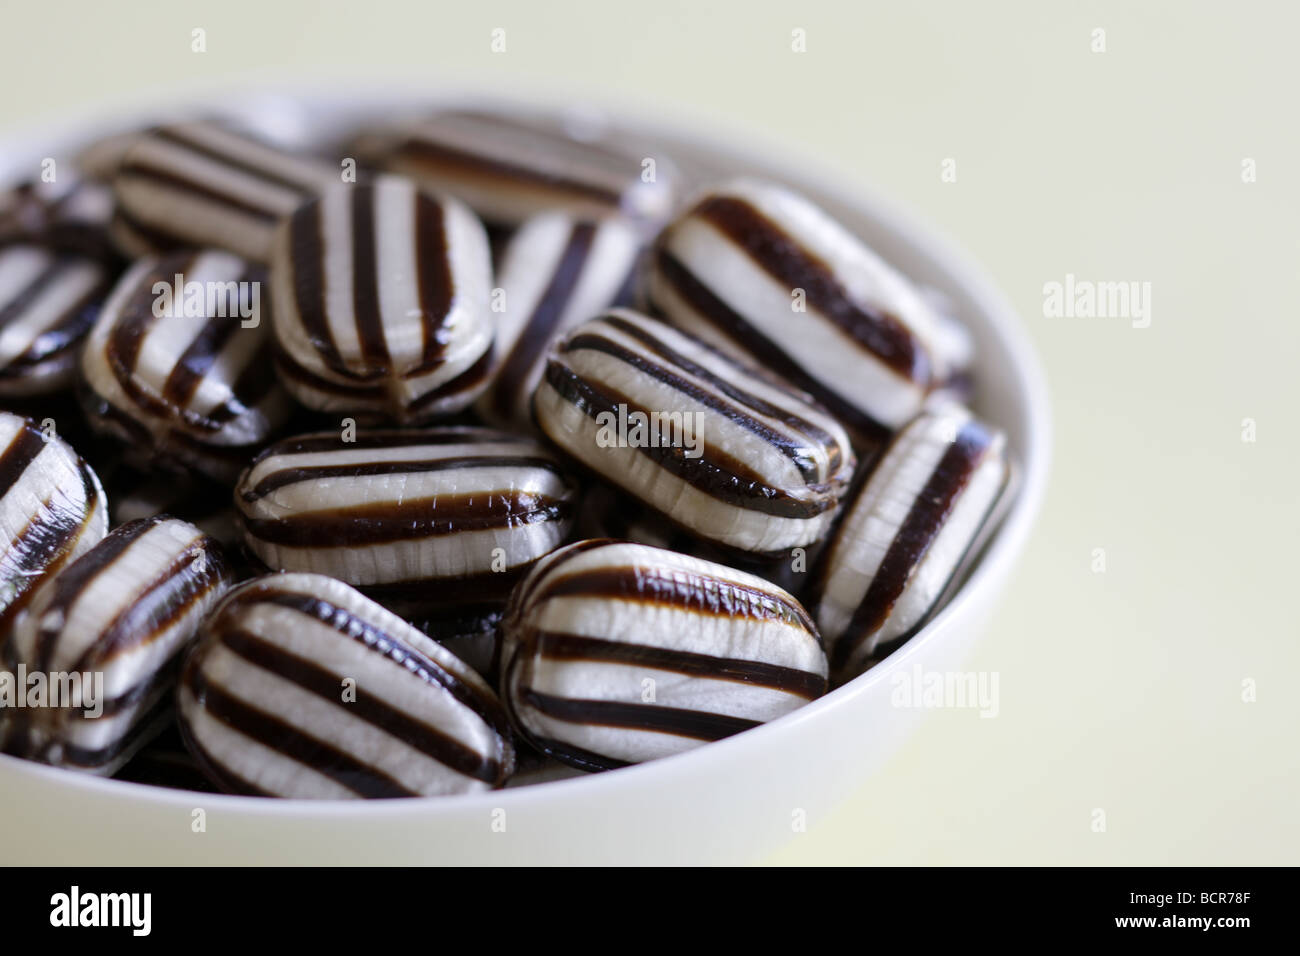 Hard Boiled Sweets Stock Photo